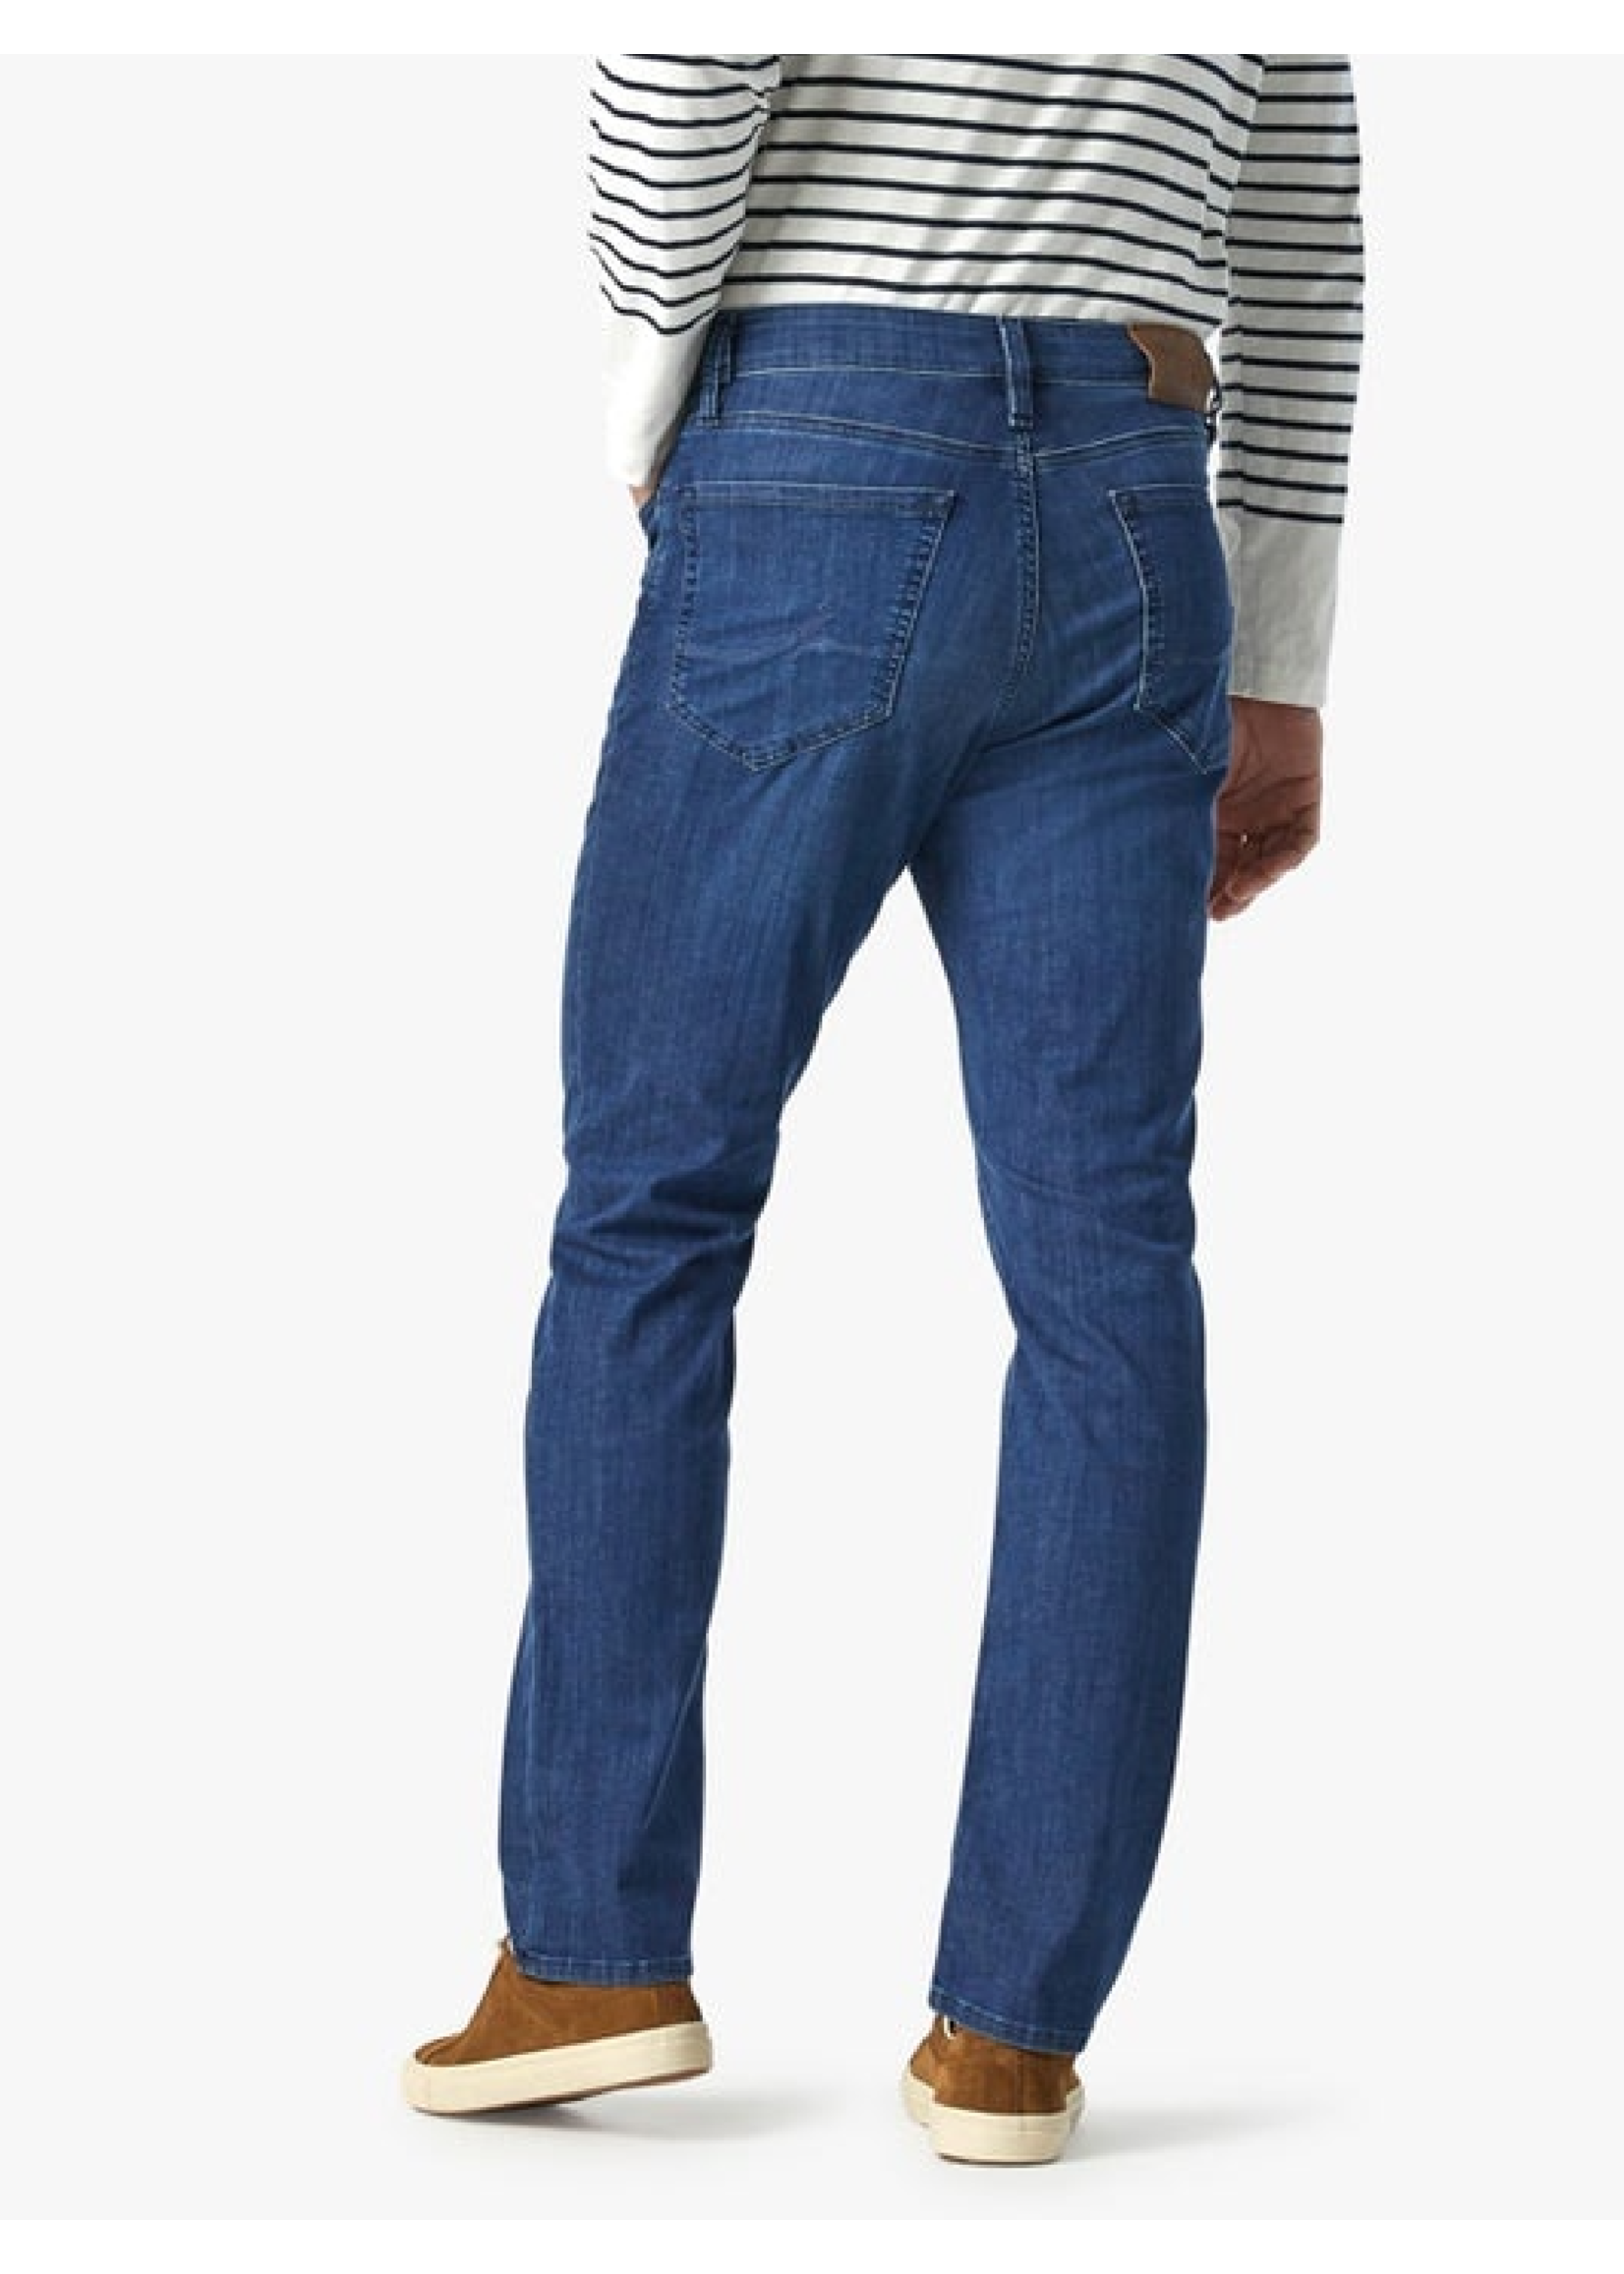 34 HERITAGE 'Charisma' Relaxed Straight Jean in Mid Kona